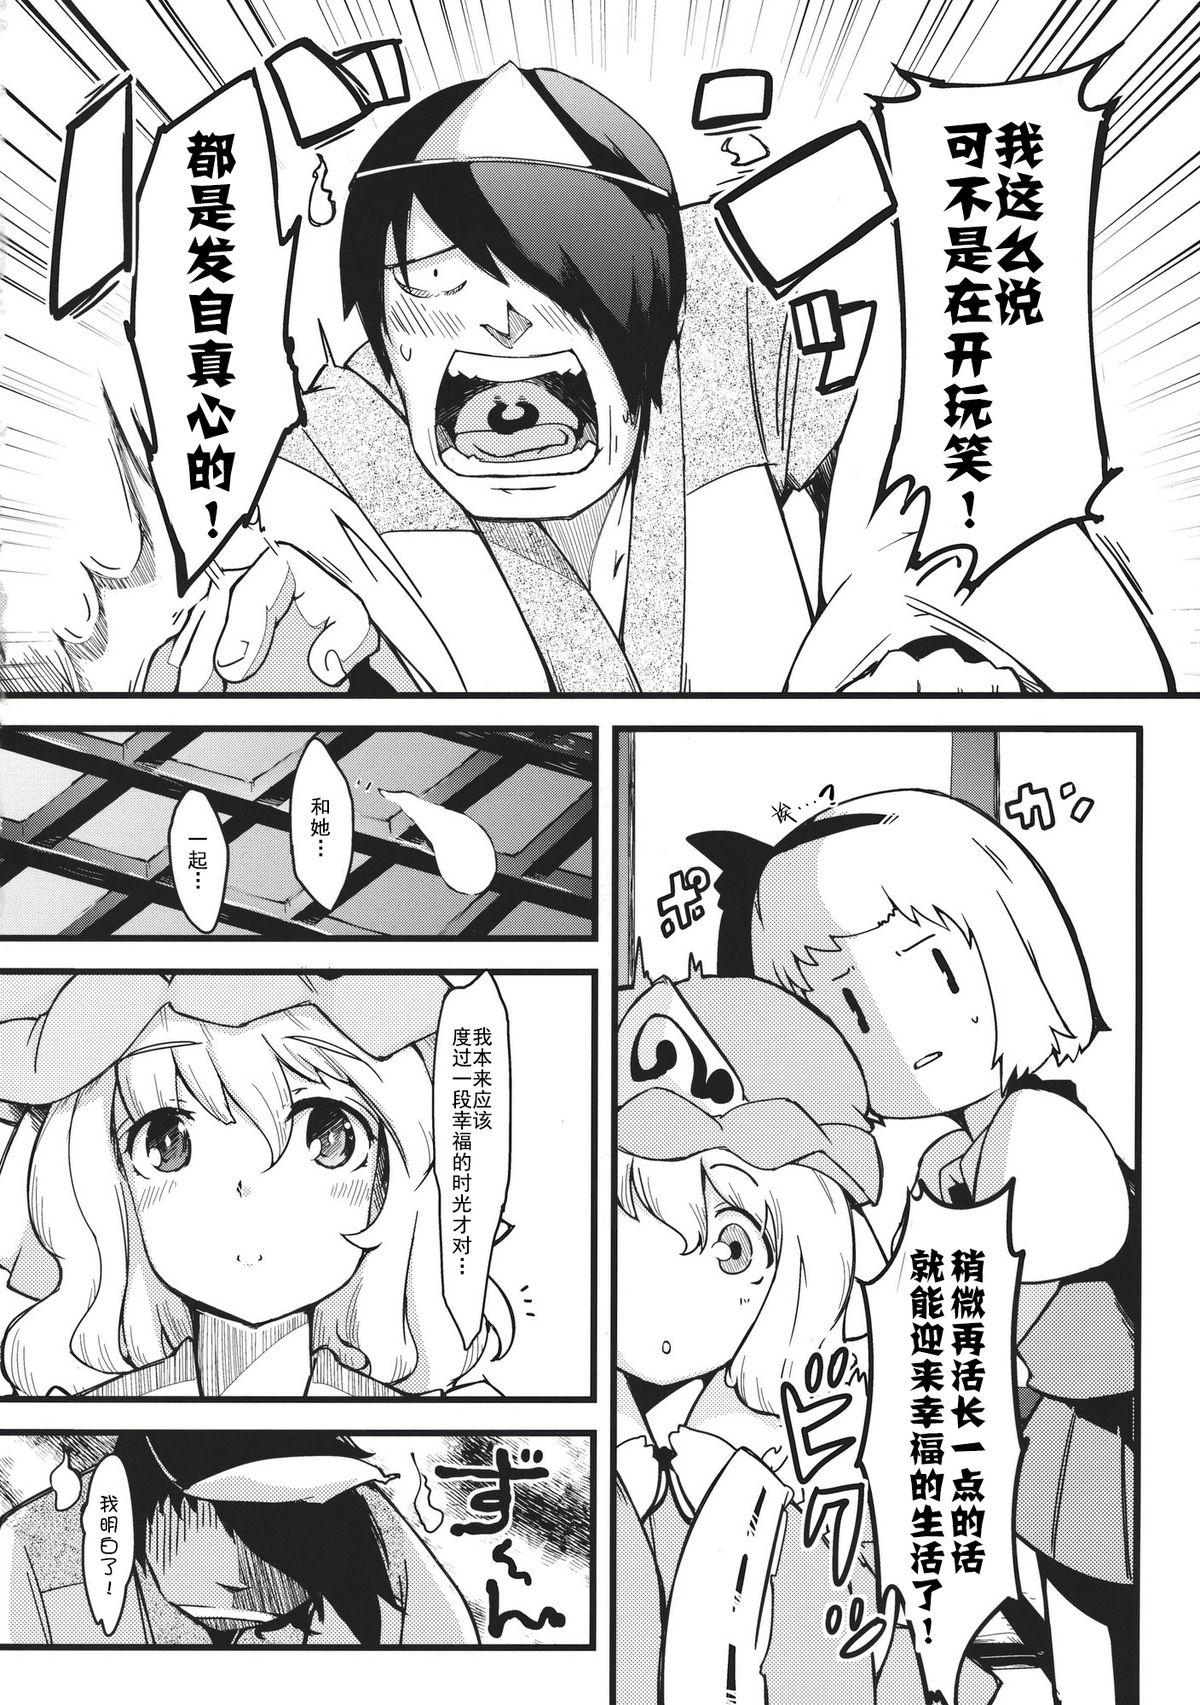 Milk Yuyukan 4 - Touhou project Picked Up - Page 4